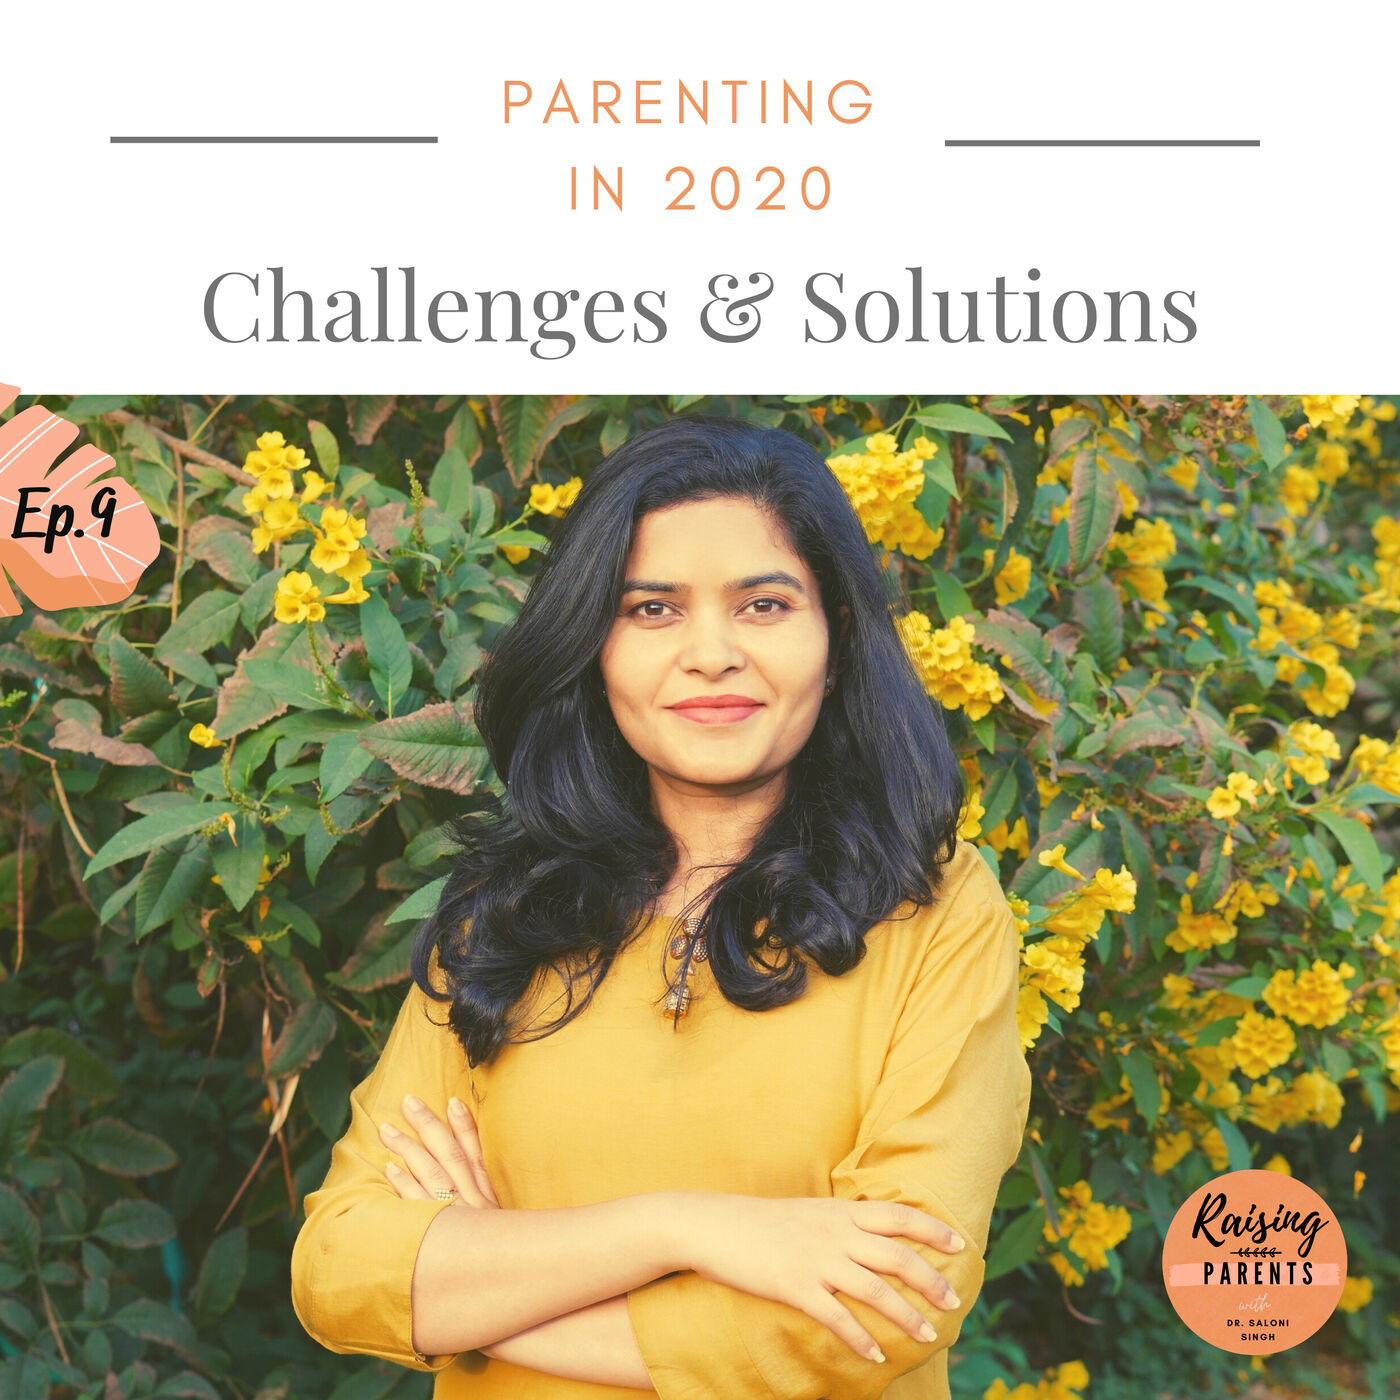 Parenting in 2020 - Challenges & Solutions